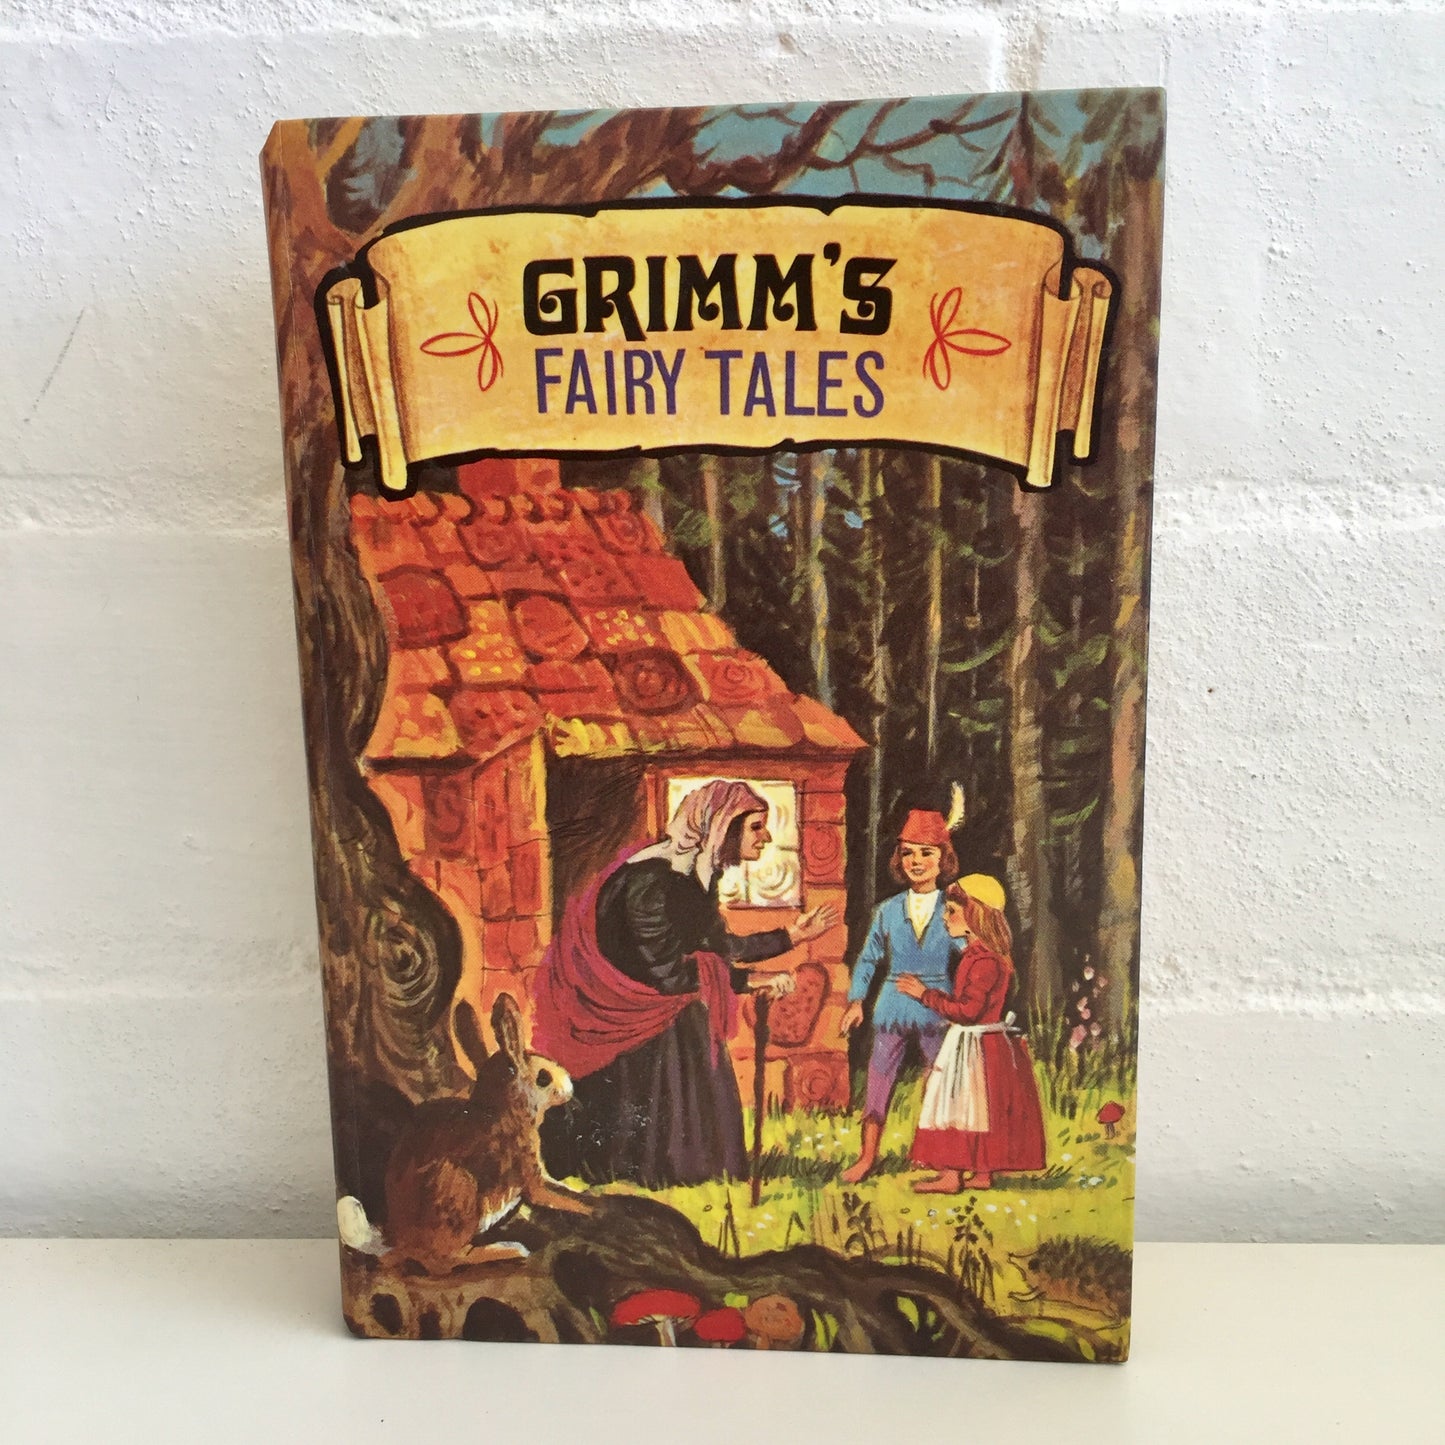 Grimm's Fairy Tales - By The Brothers Grimm